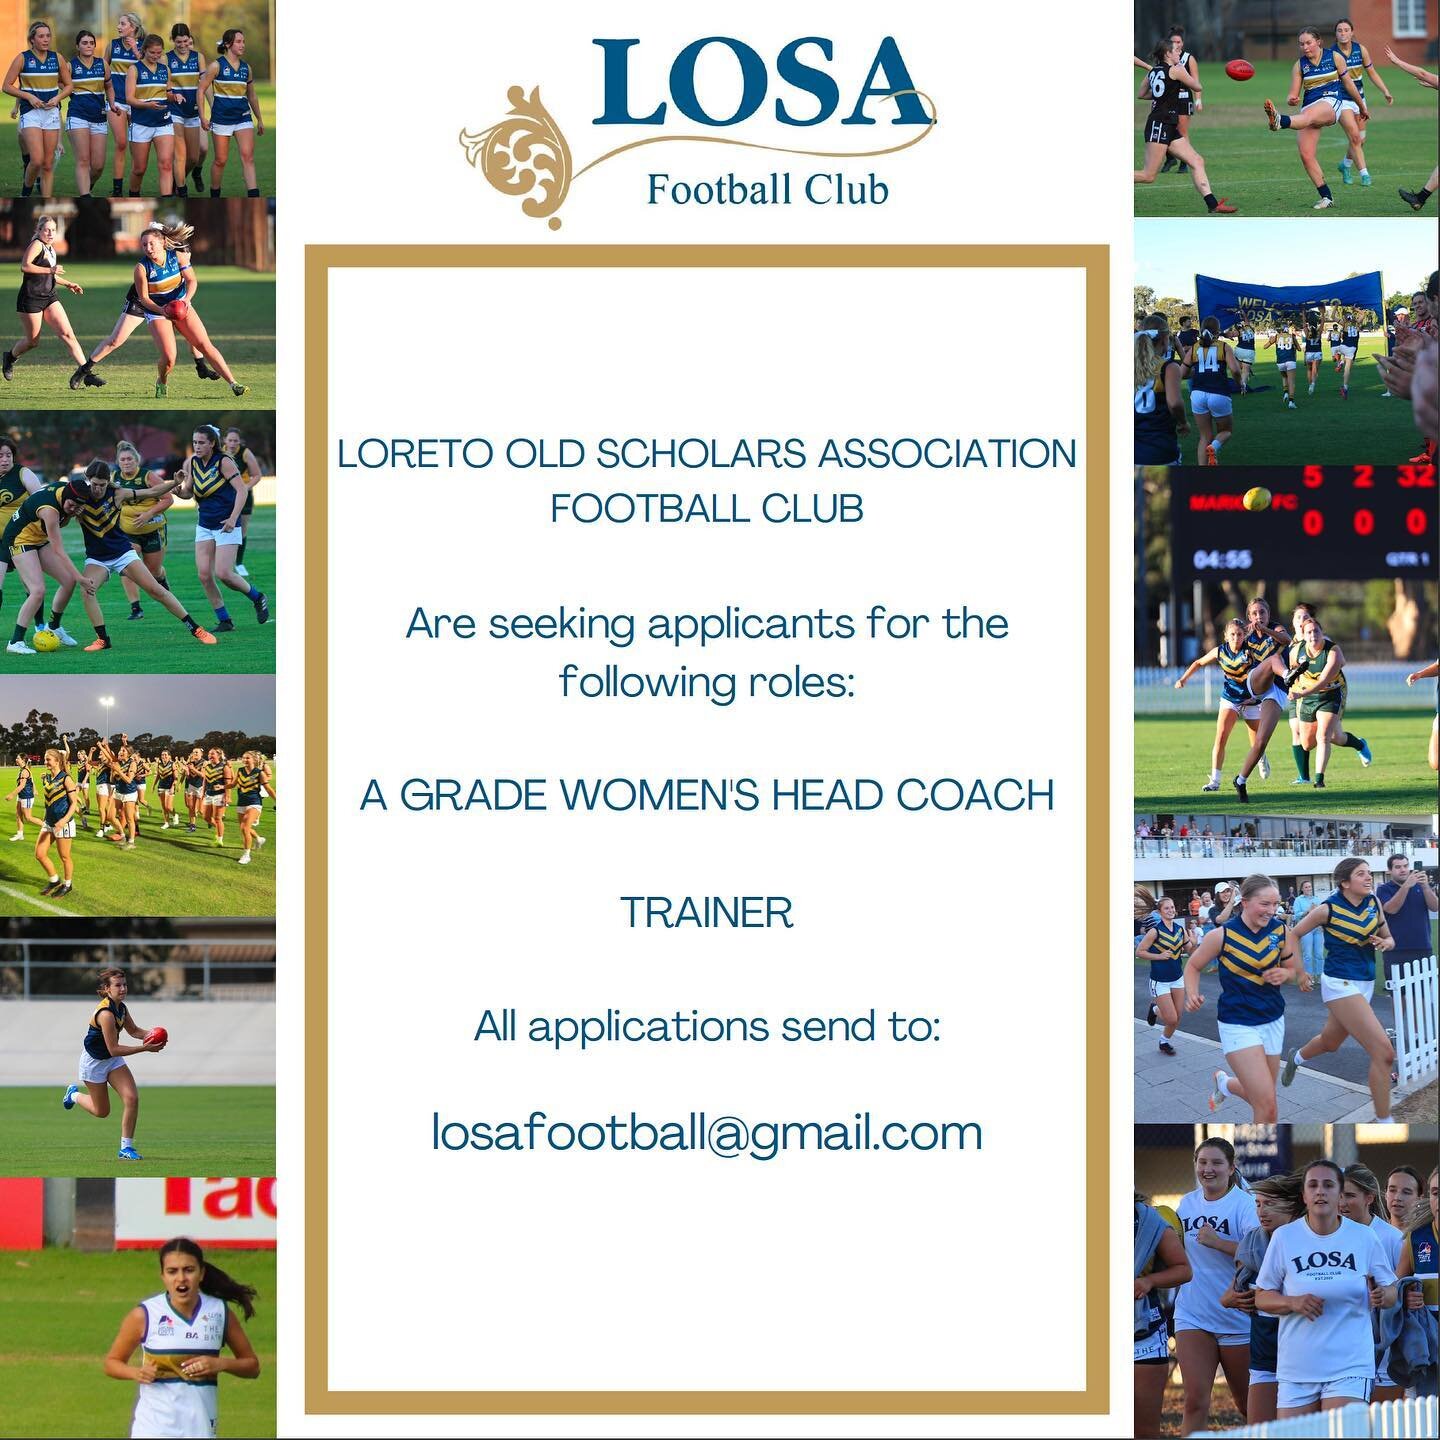 We are seeking applications for positions to be filled for the 2023 season.

For the positions of HEAD COACH and TRAINER. Please email losafootball@gmail.com if you or anyone you know is interested! 💛💙